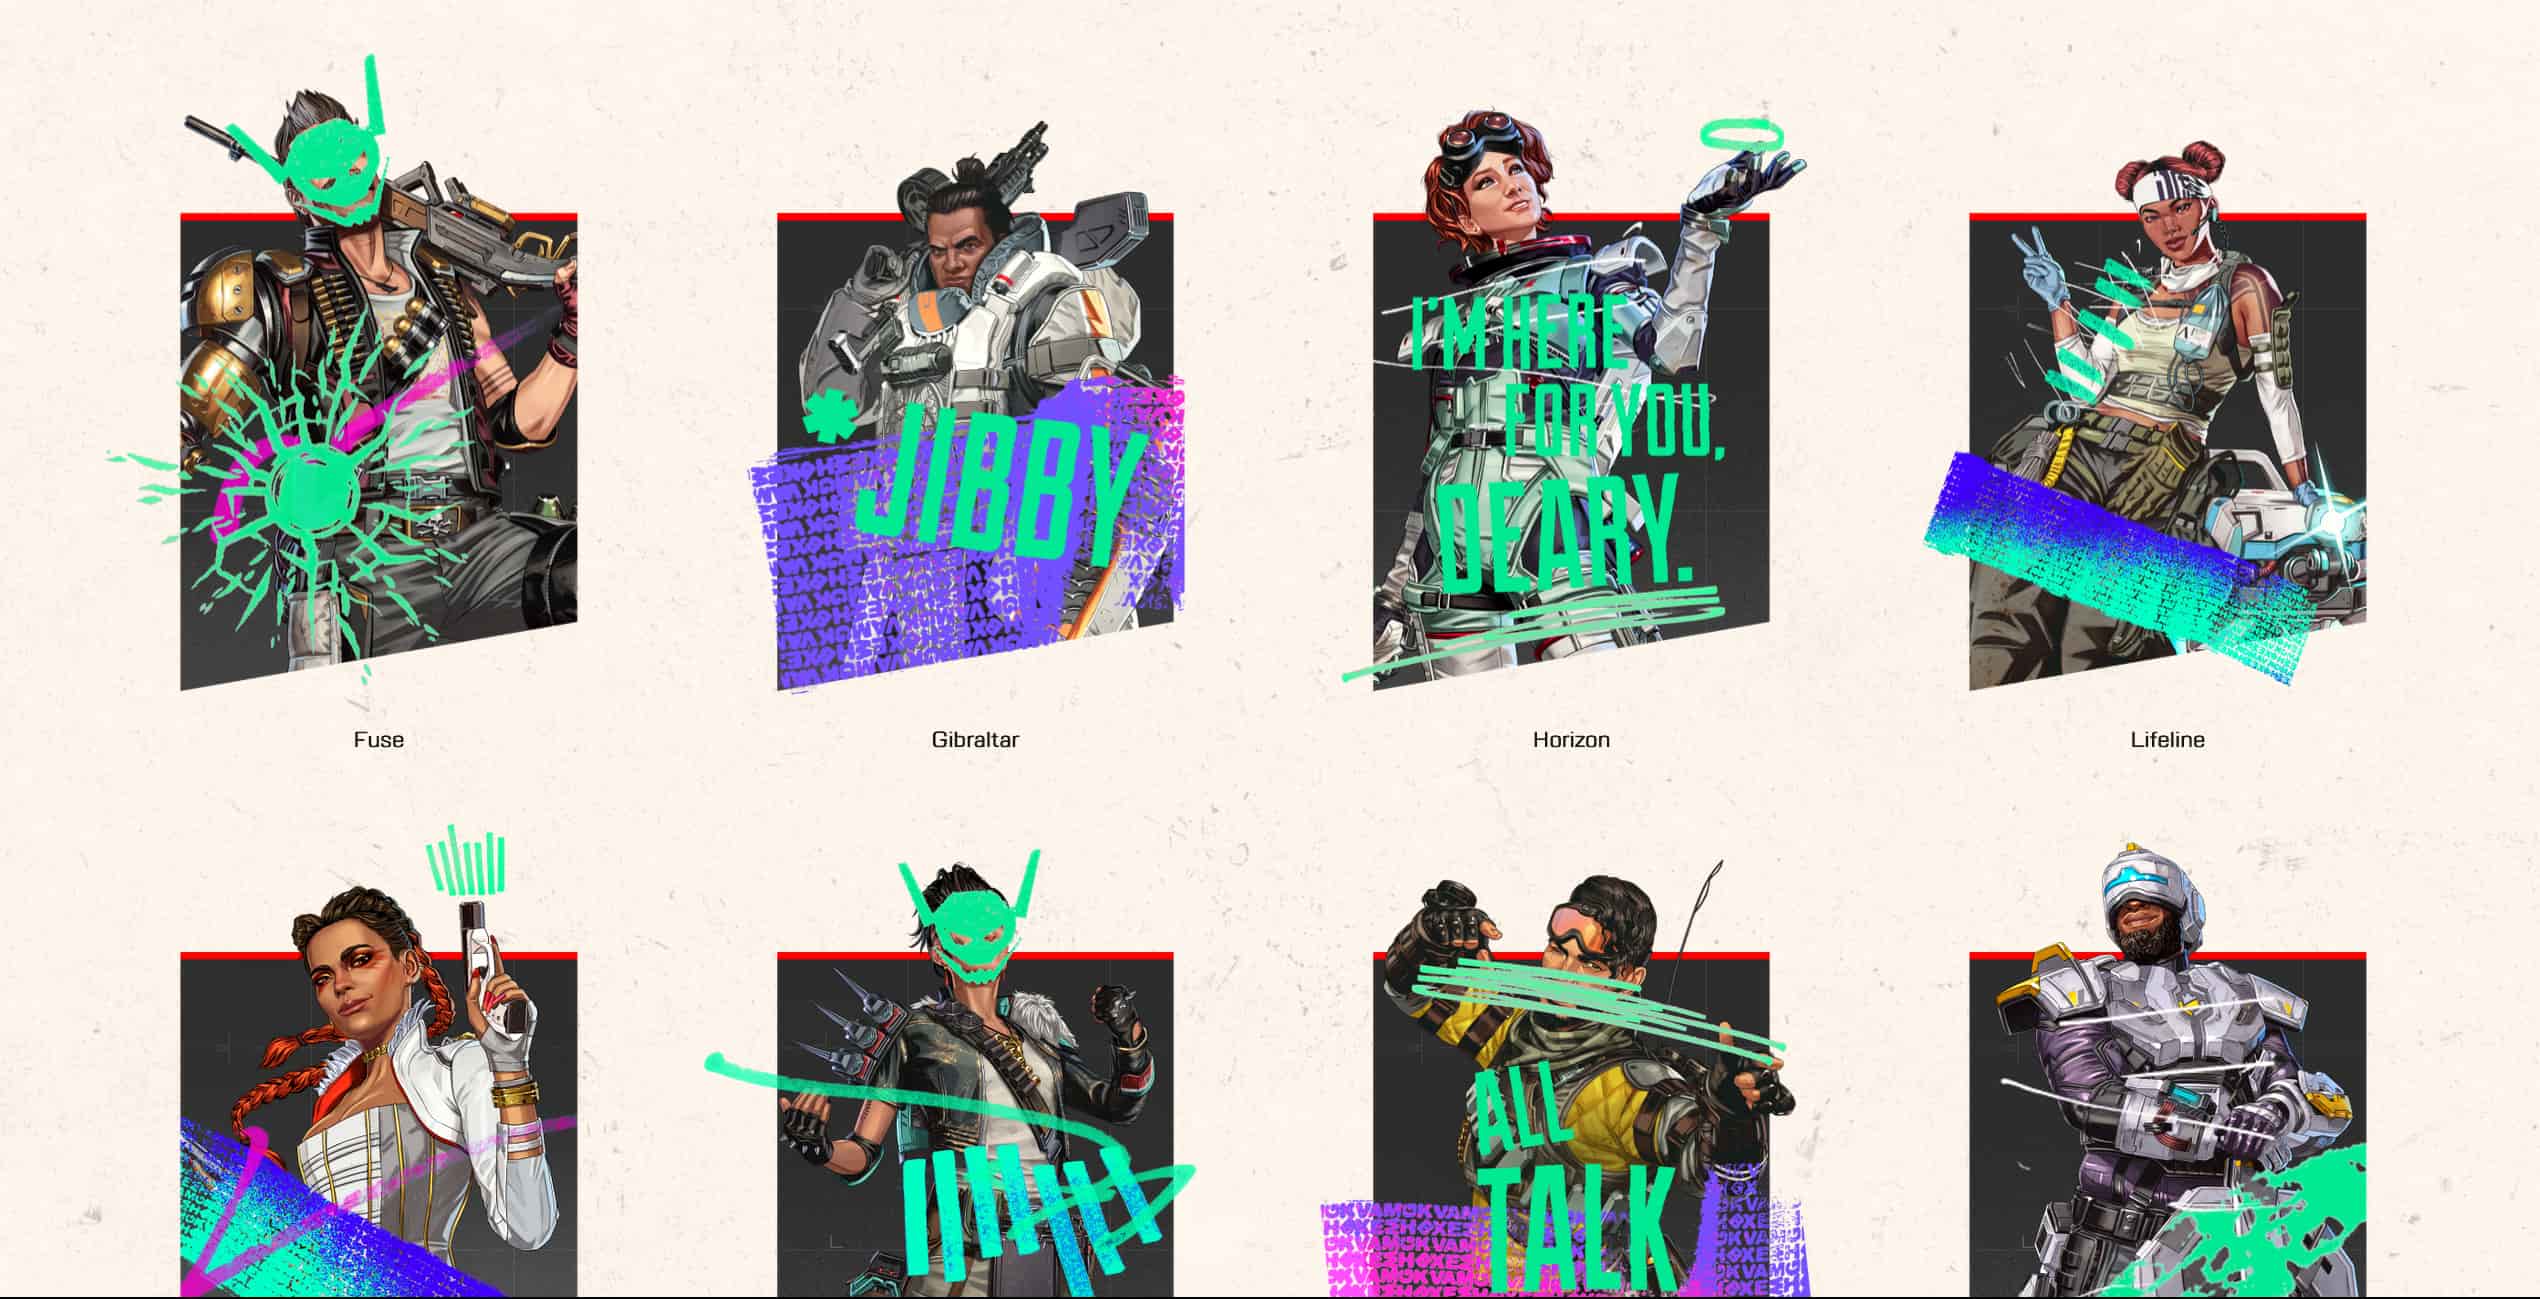 The Apex Legends character portraits featuring green graffiti scrawled over them.